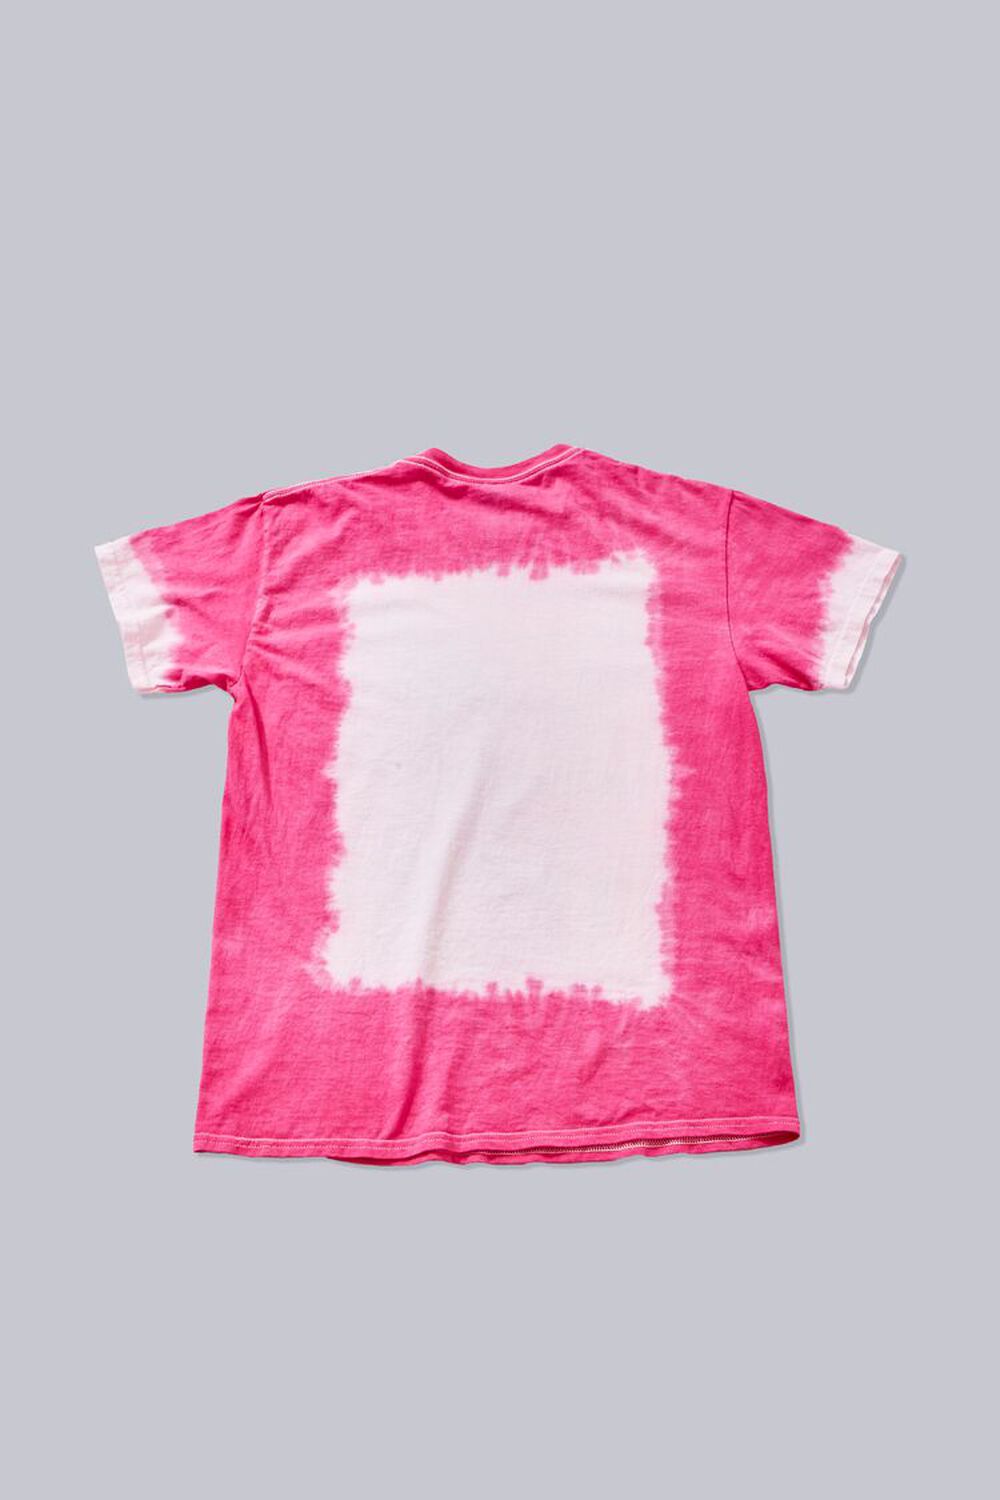 PINK/MULTI The Offspring Graphic Tee, image 2